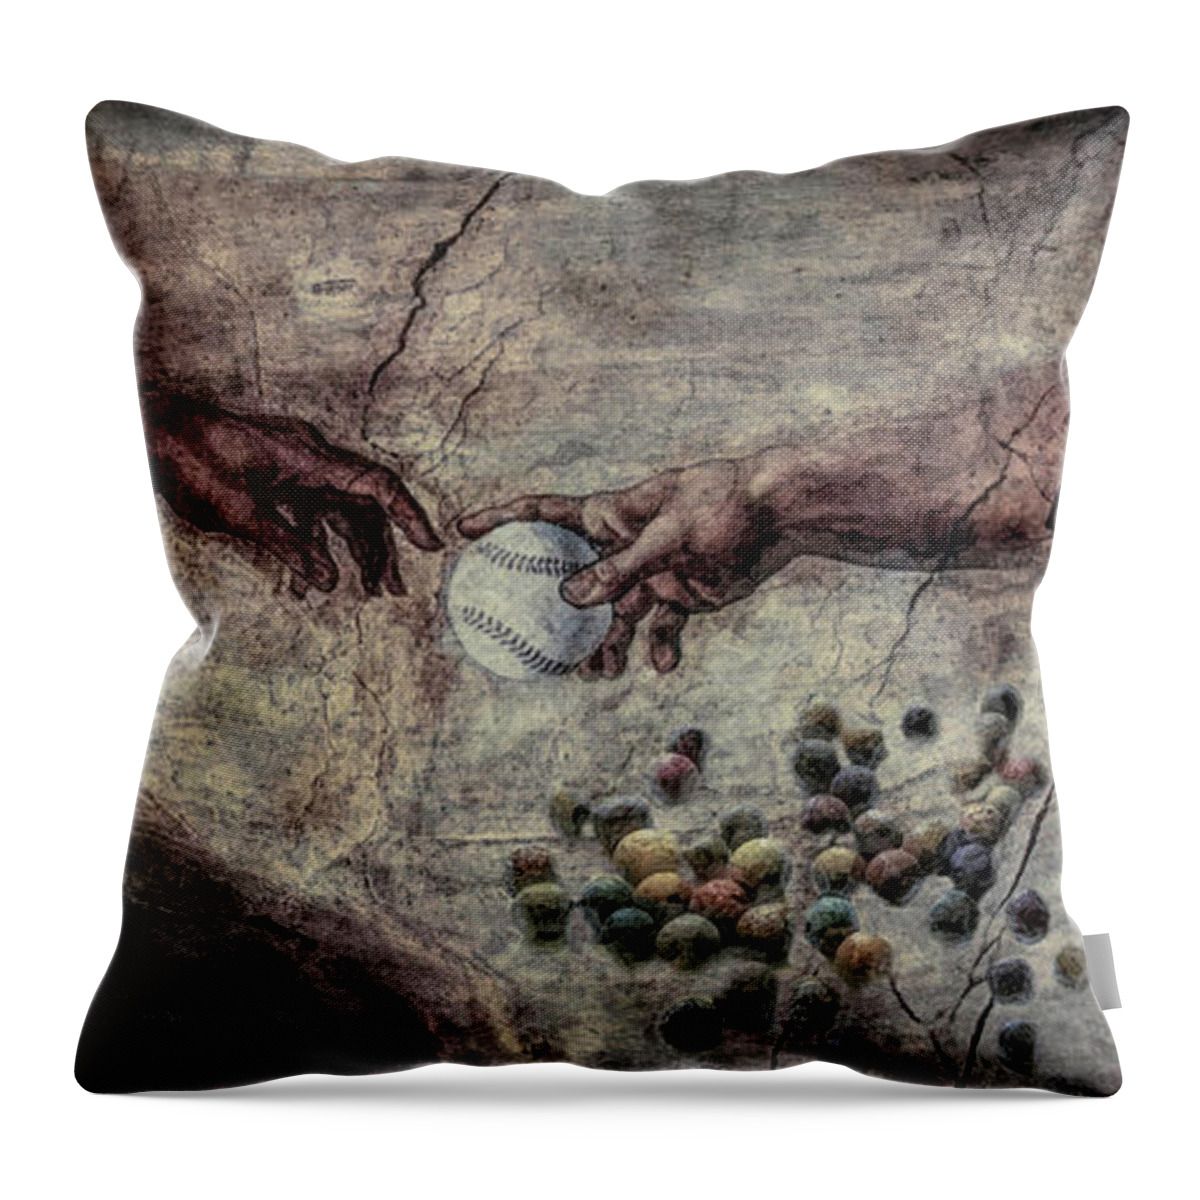 Poetry Throw Pillow featuring the photograph Portrait of the Poet - Donald Hall by Wayne King